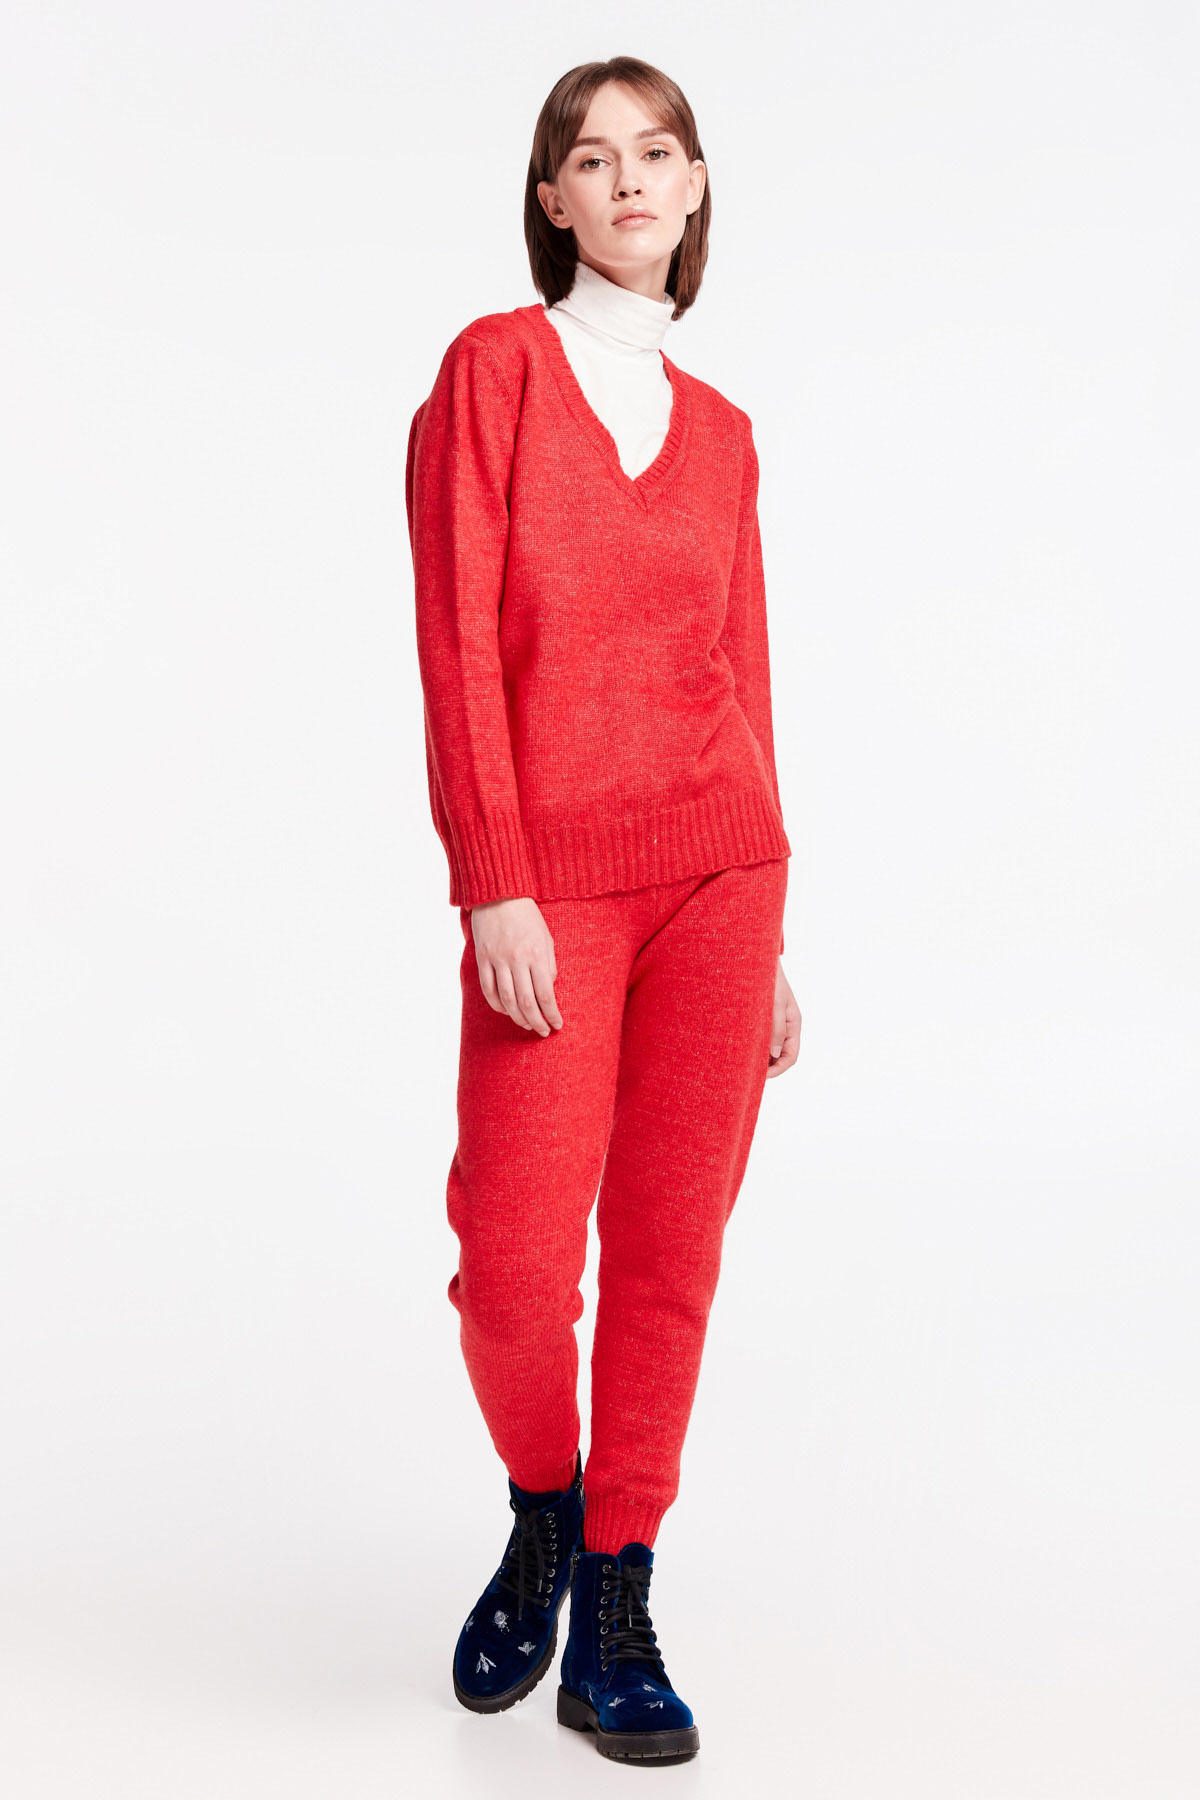 Red V-neck sweater, photo 2